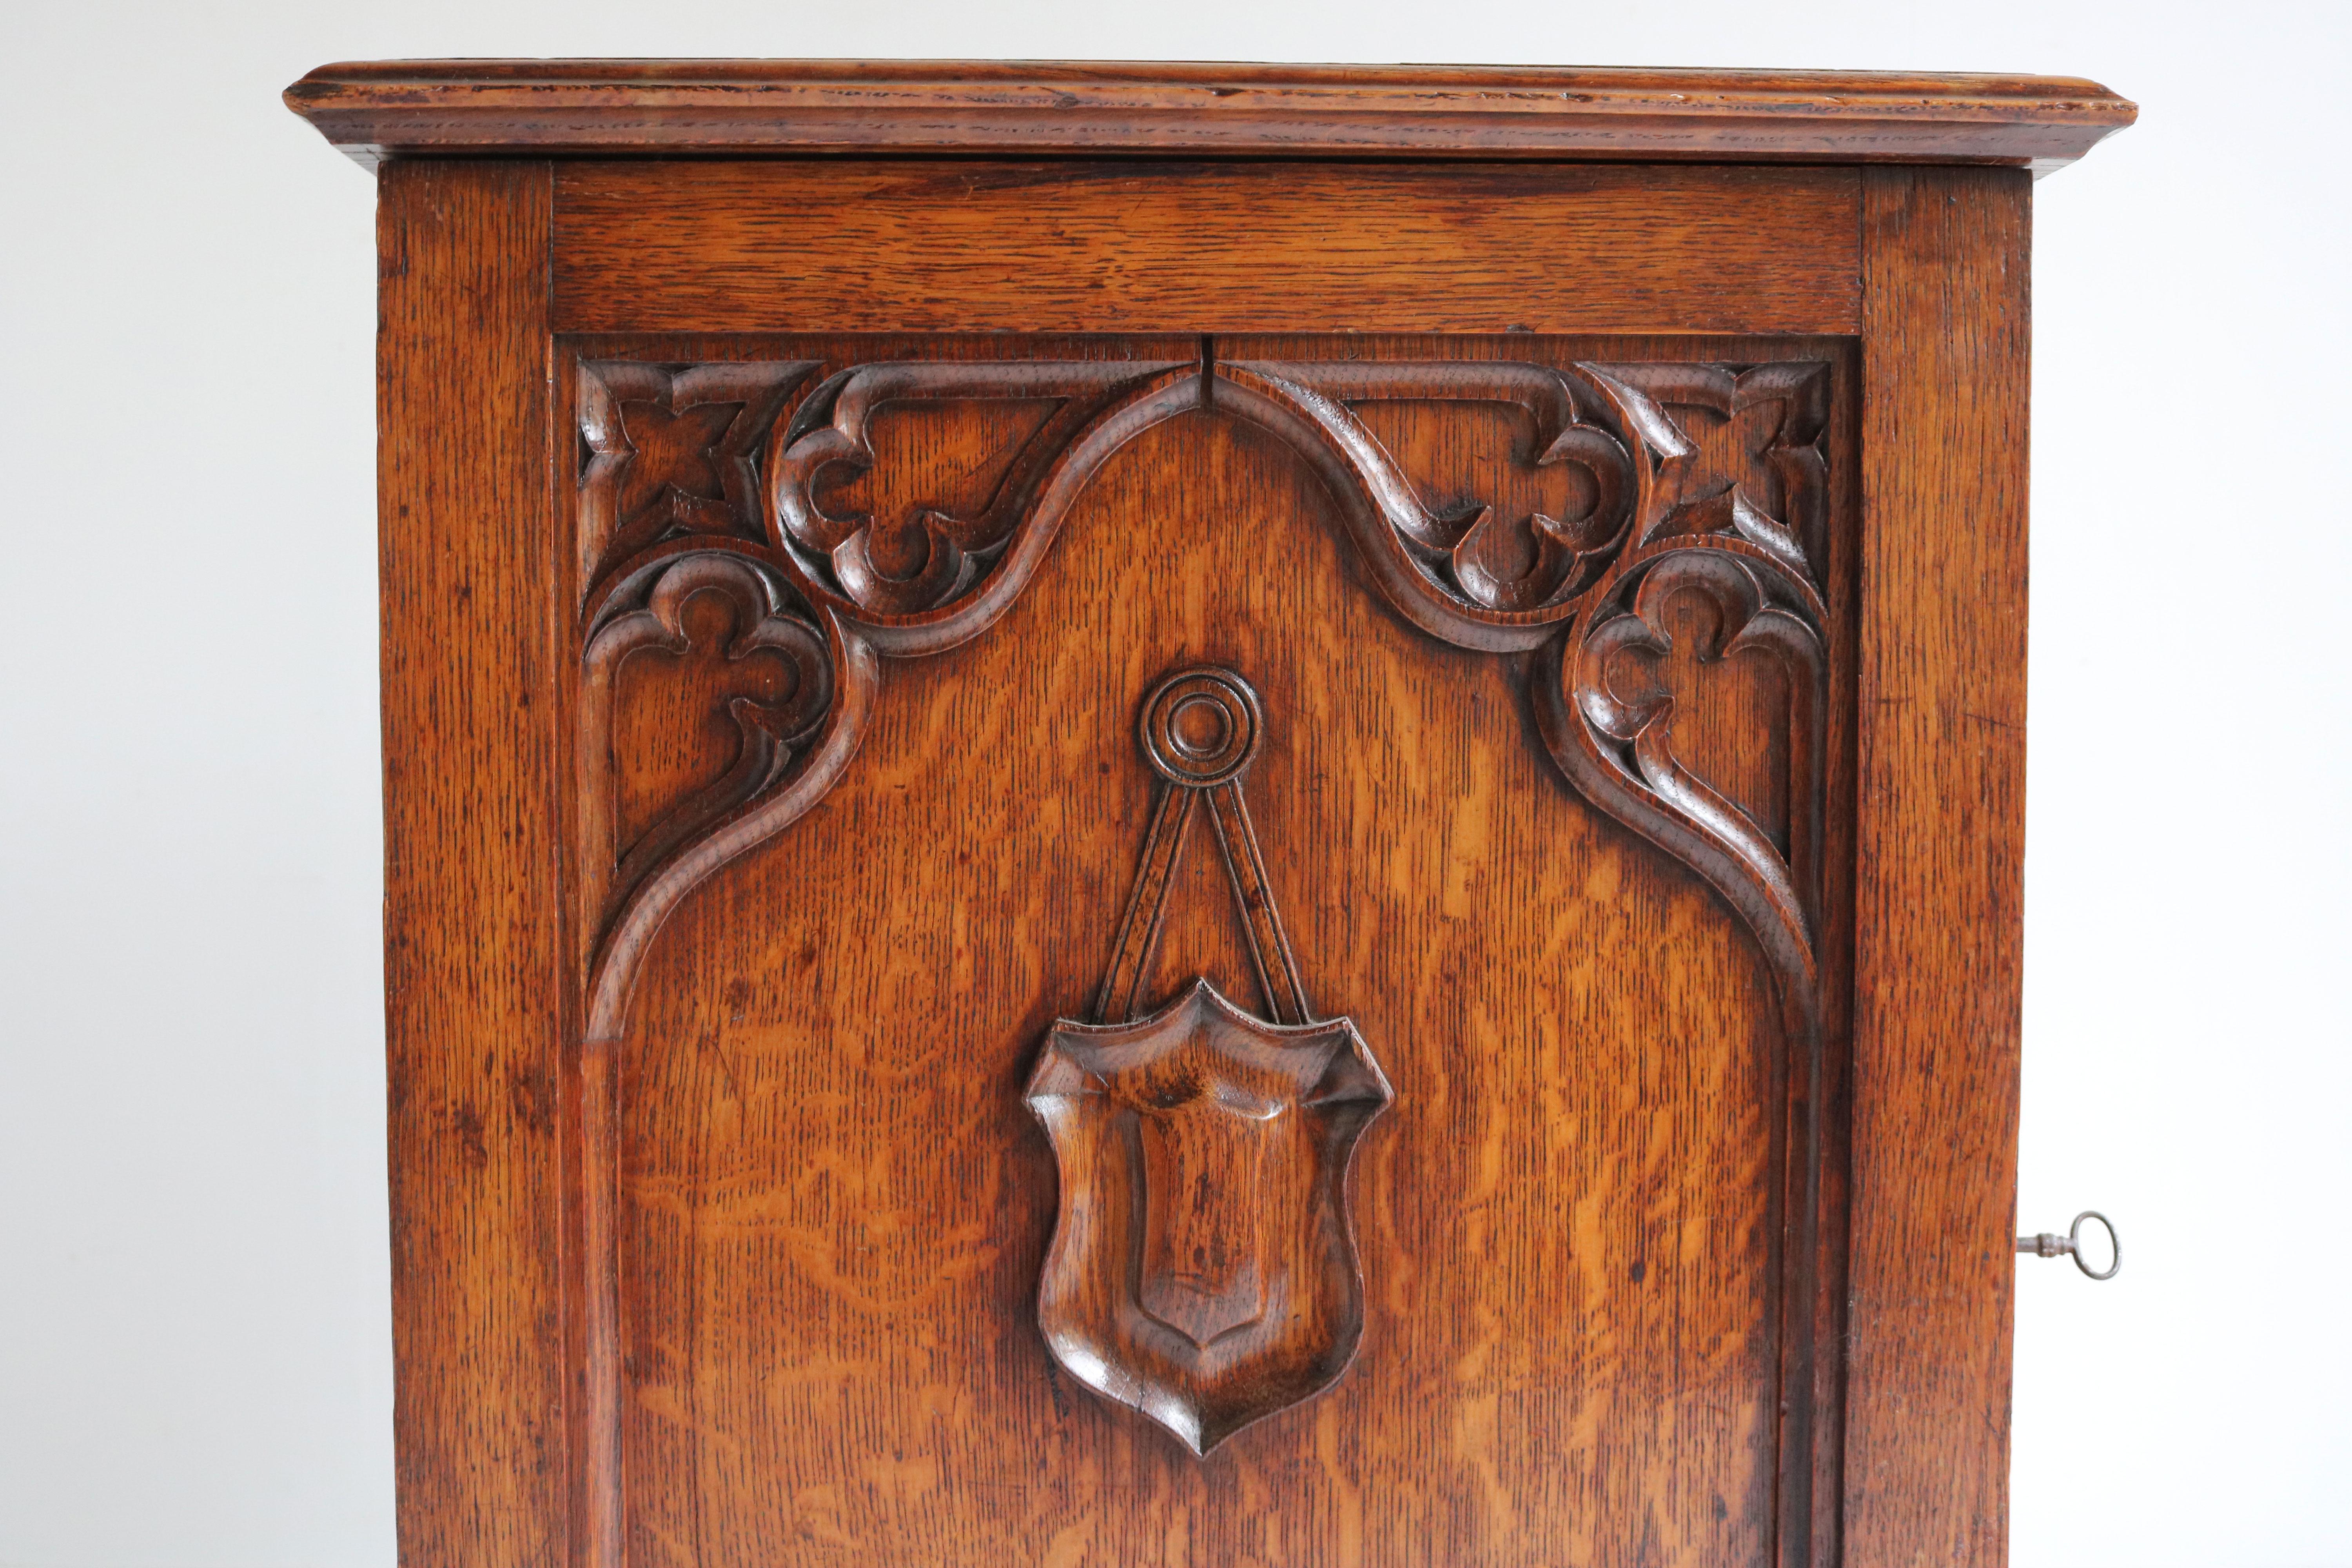 Exquisite Antique Gothic Revival French antique Small cabinet / Wall cabinet from a church made from solid Oak 19th century. 
The cabinet has a gorgeous decorated front door with Gothic symbols , amazing patina on the European oak. 
The interior